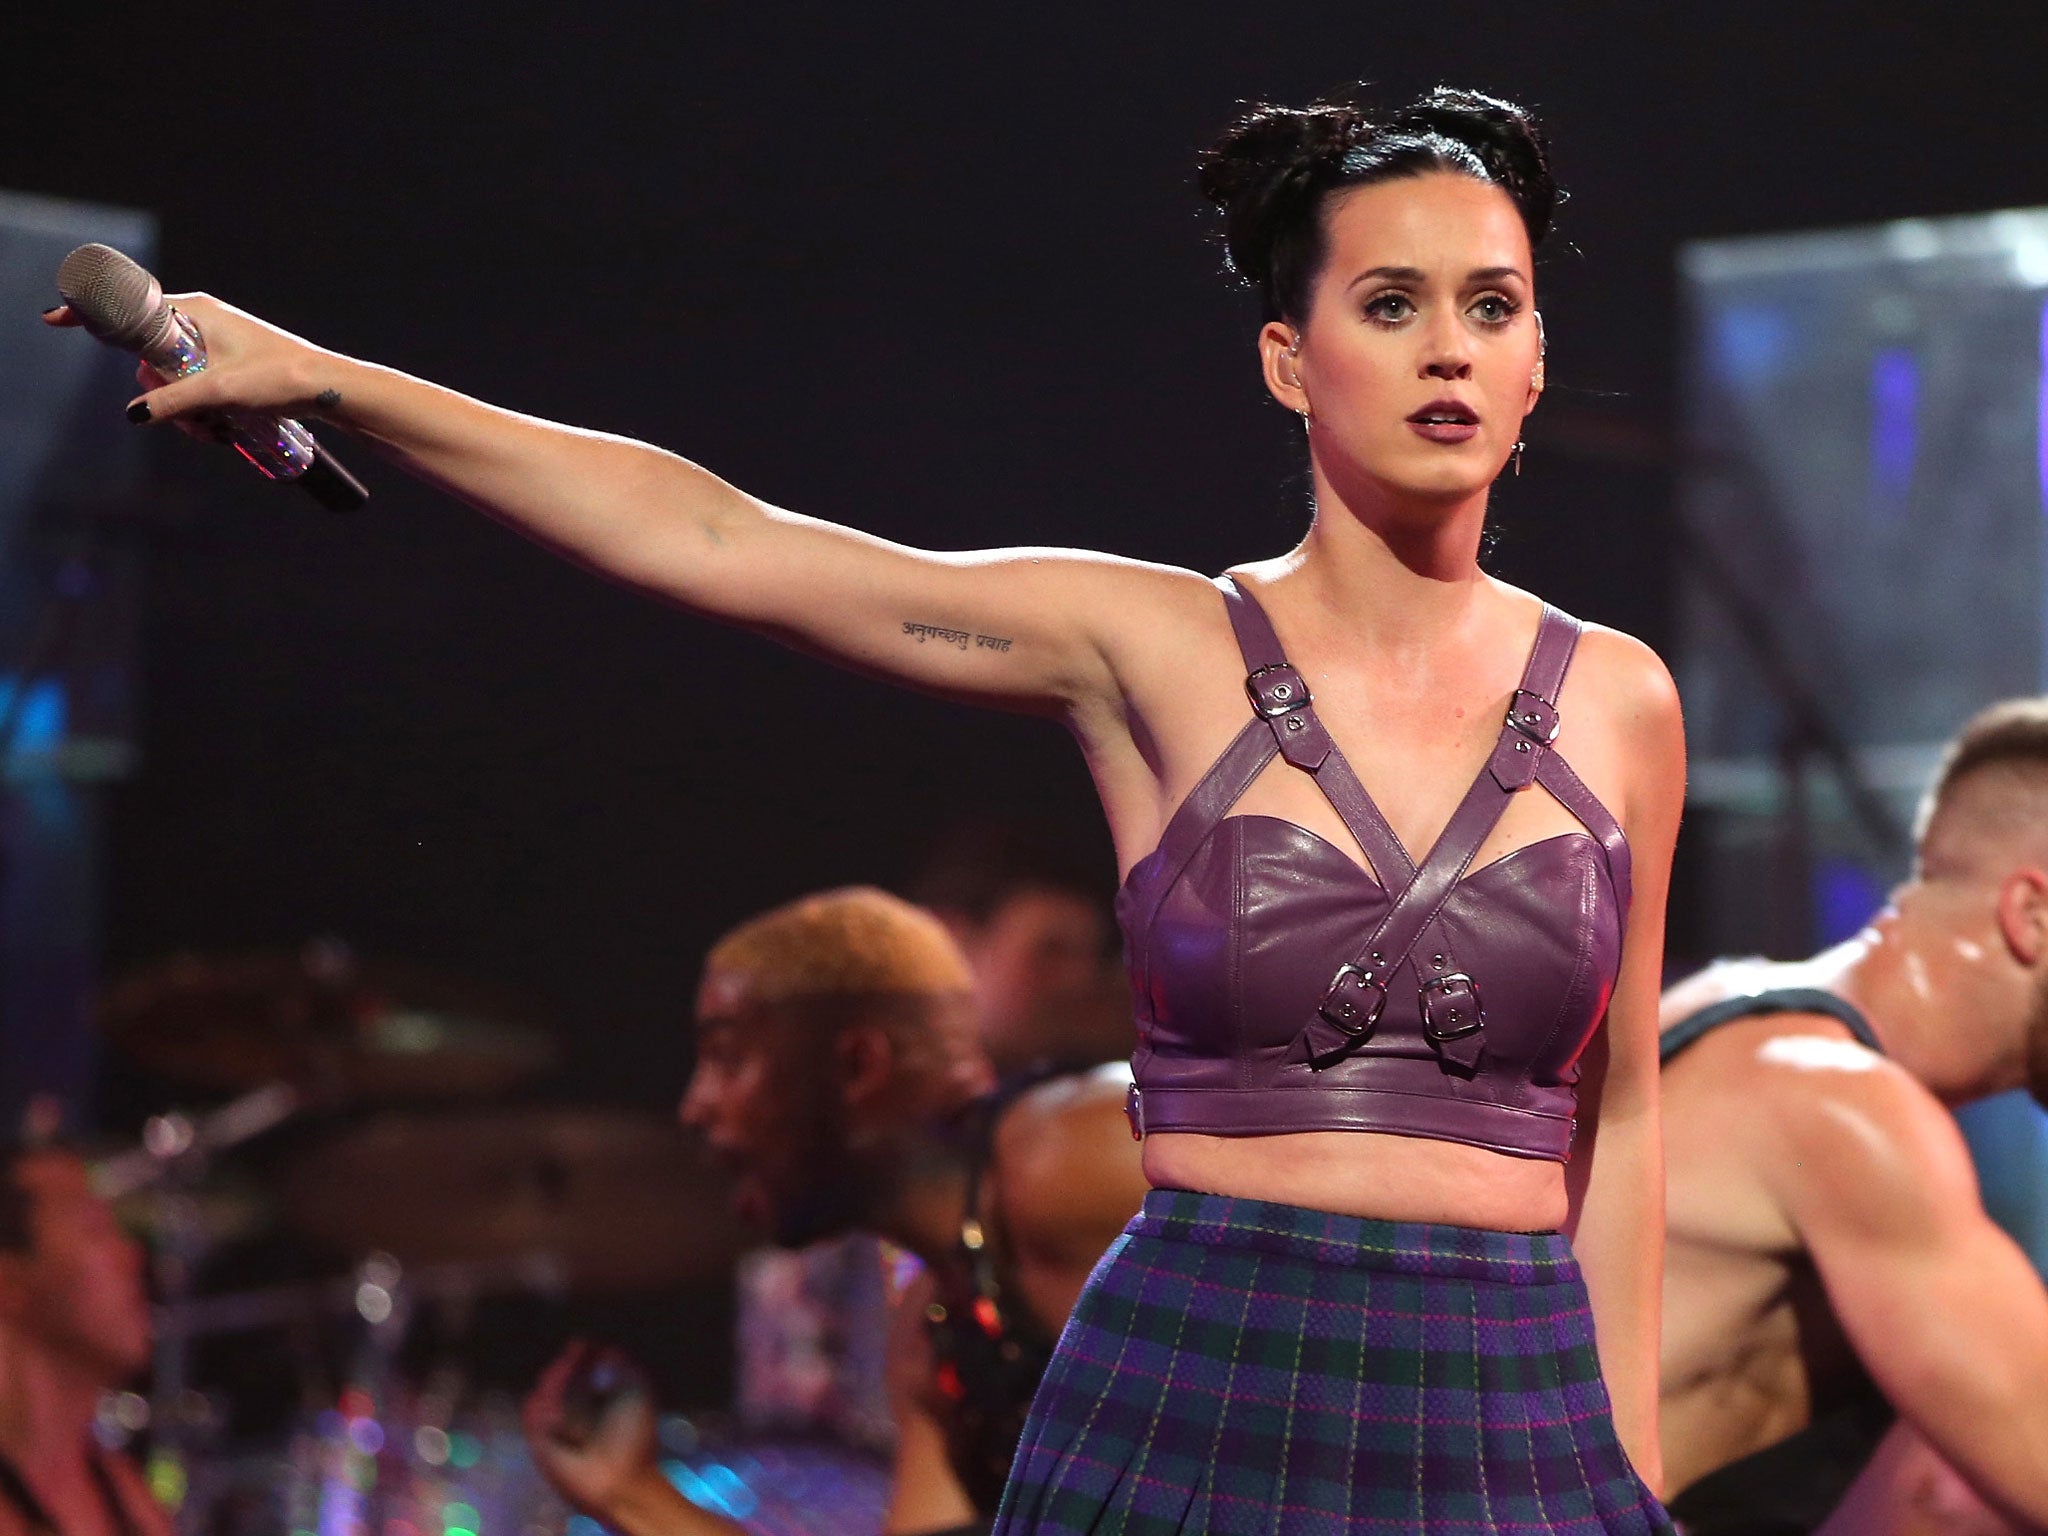 Katy Perry sings at the iTunes festival